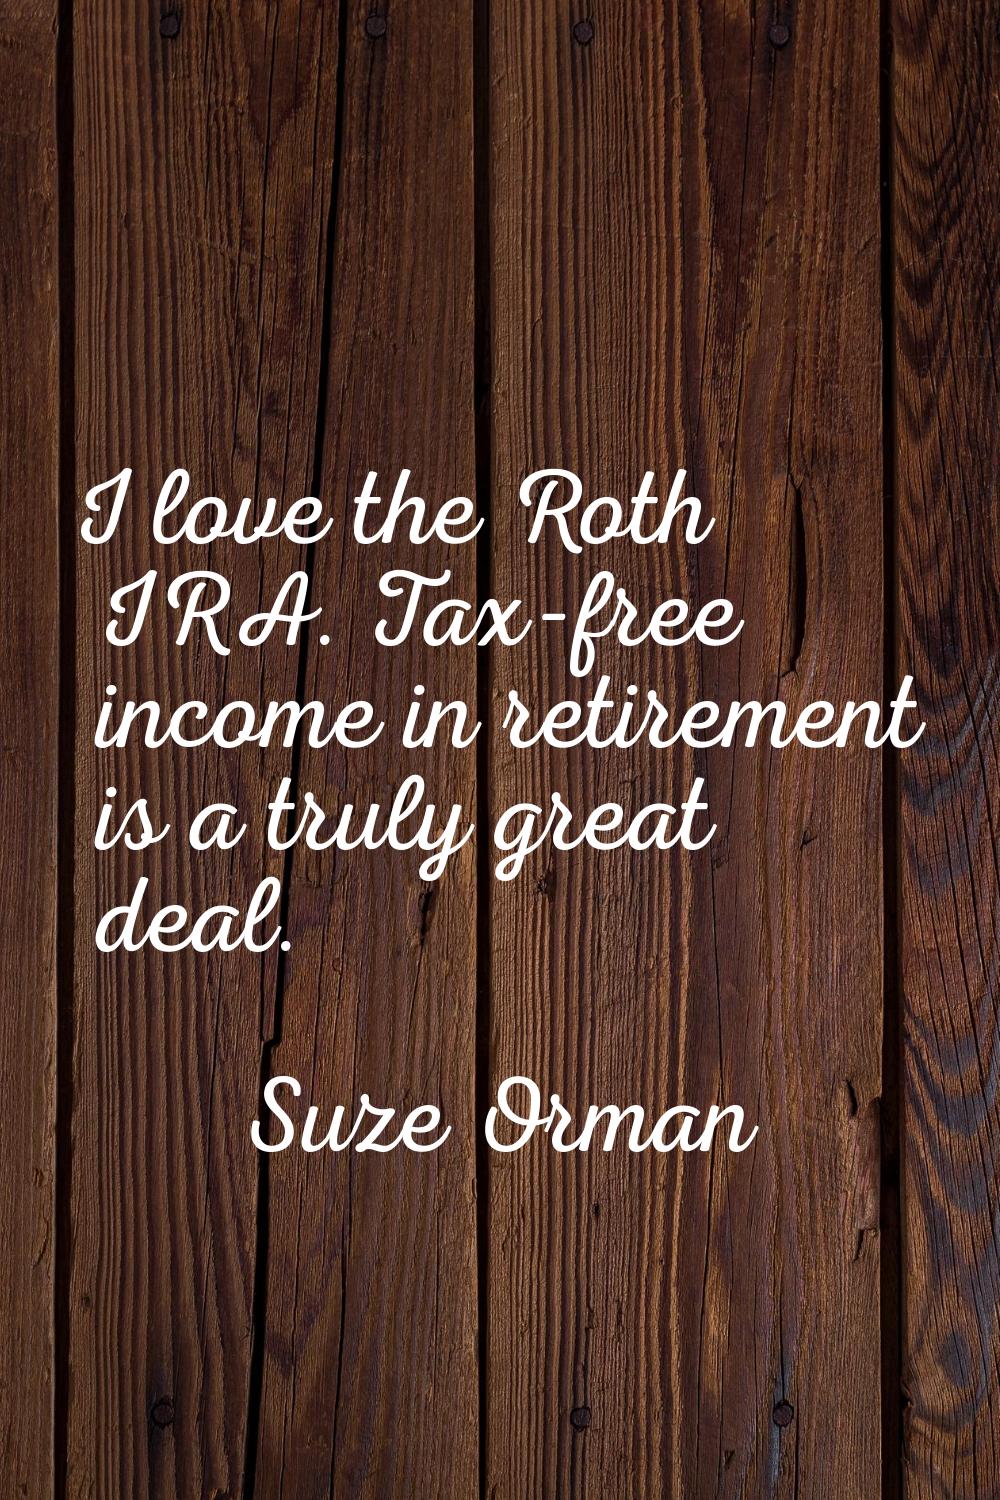 I love the Roth IRA. Tax-free income in retirement is a truly great deal.